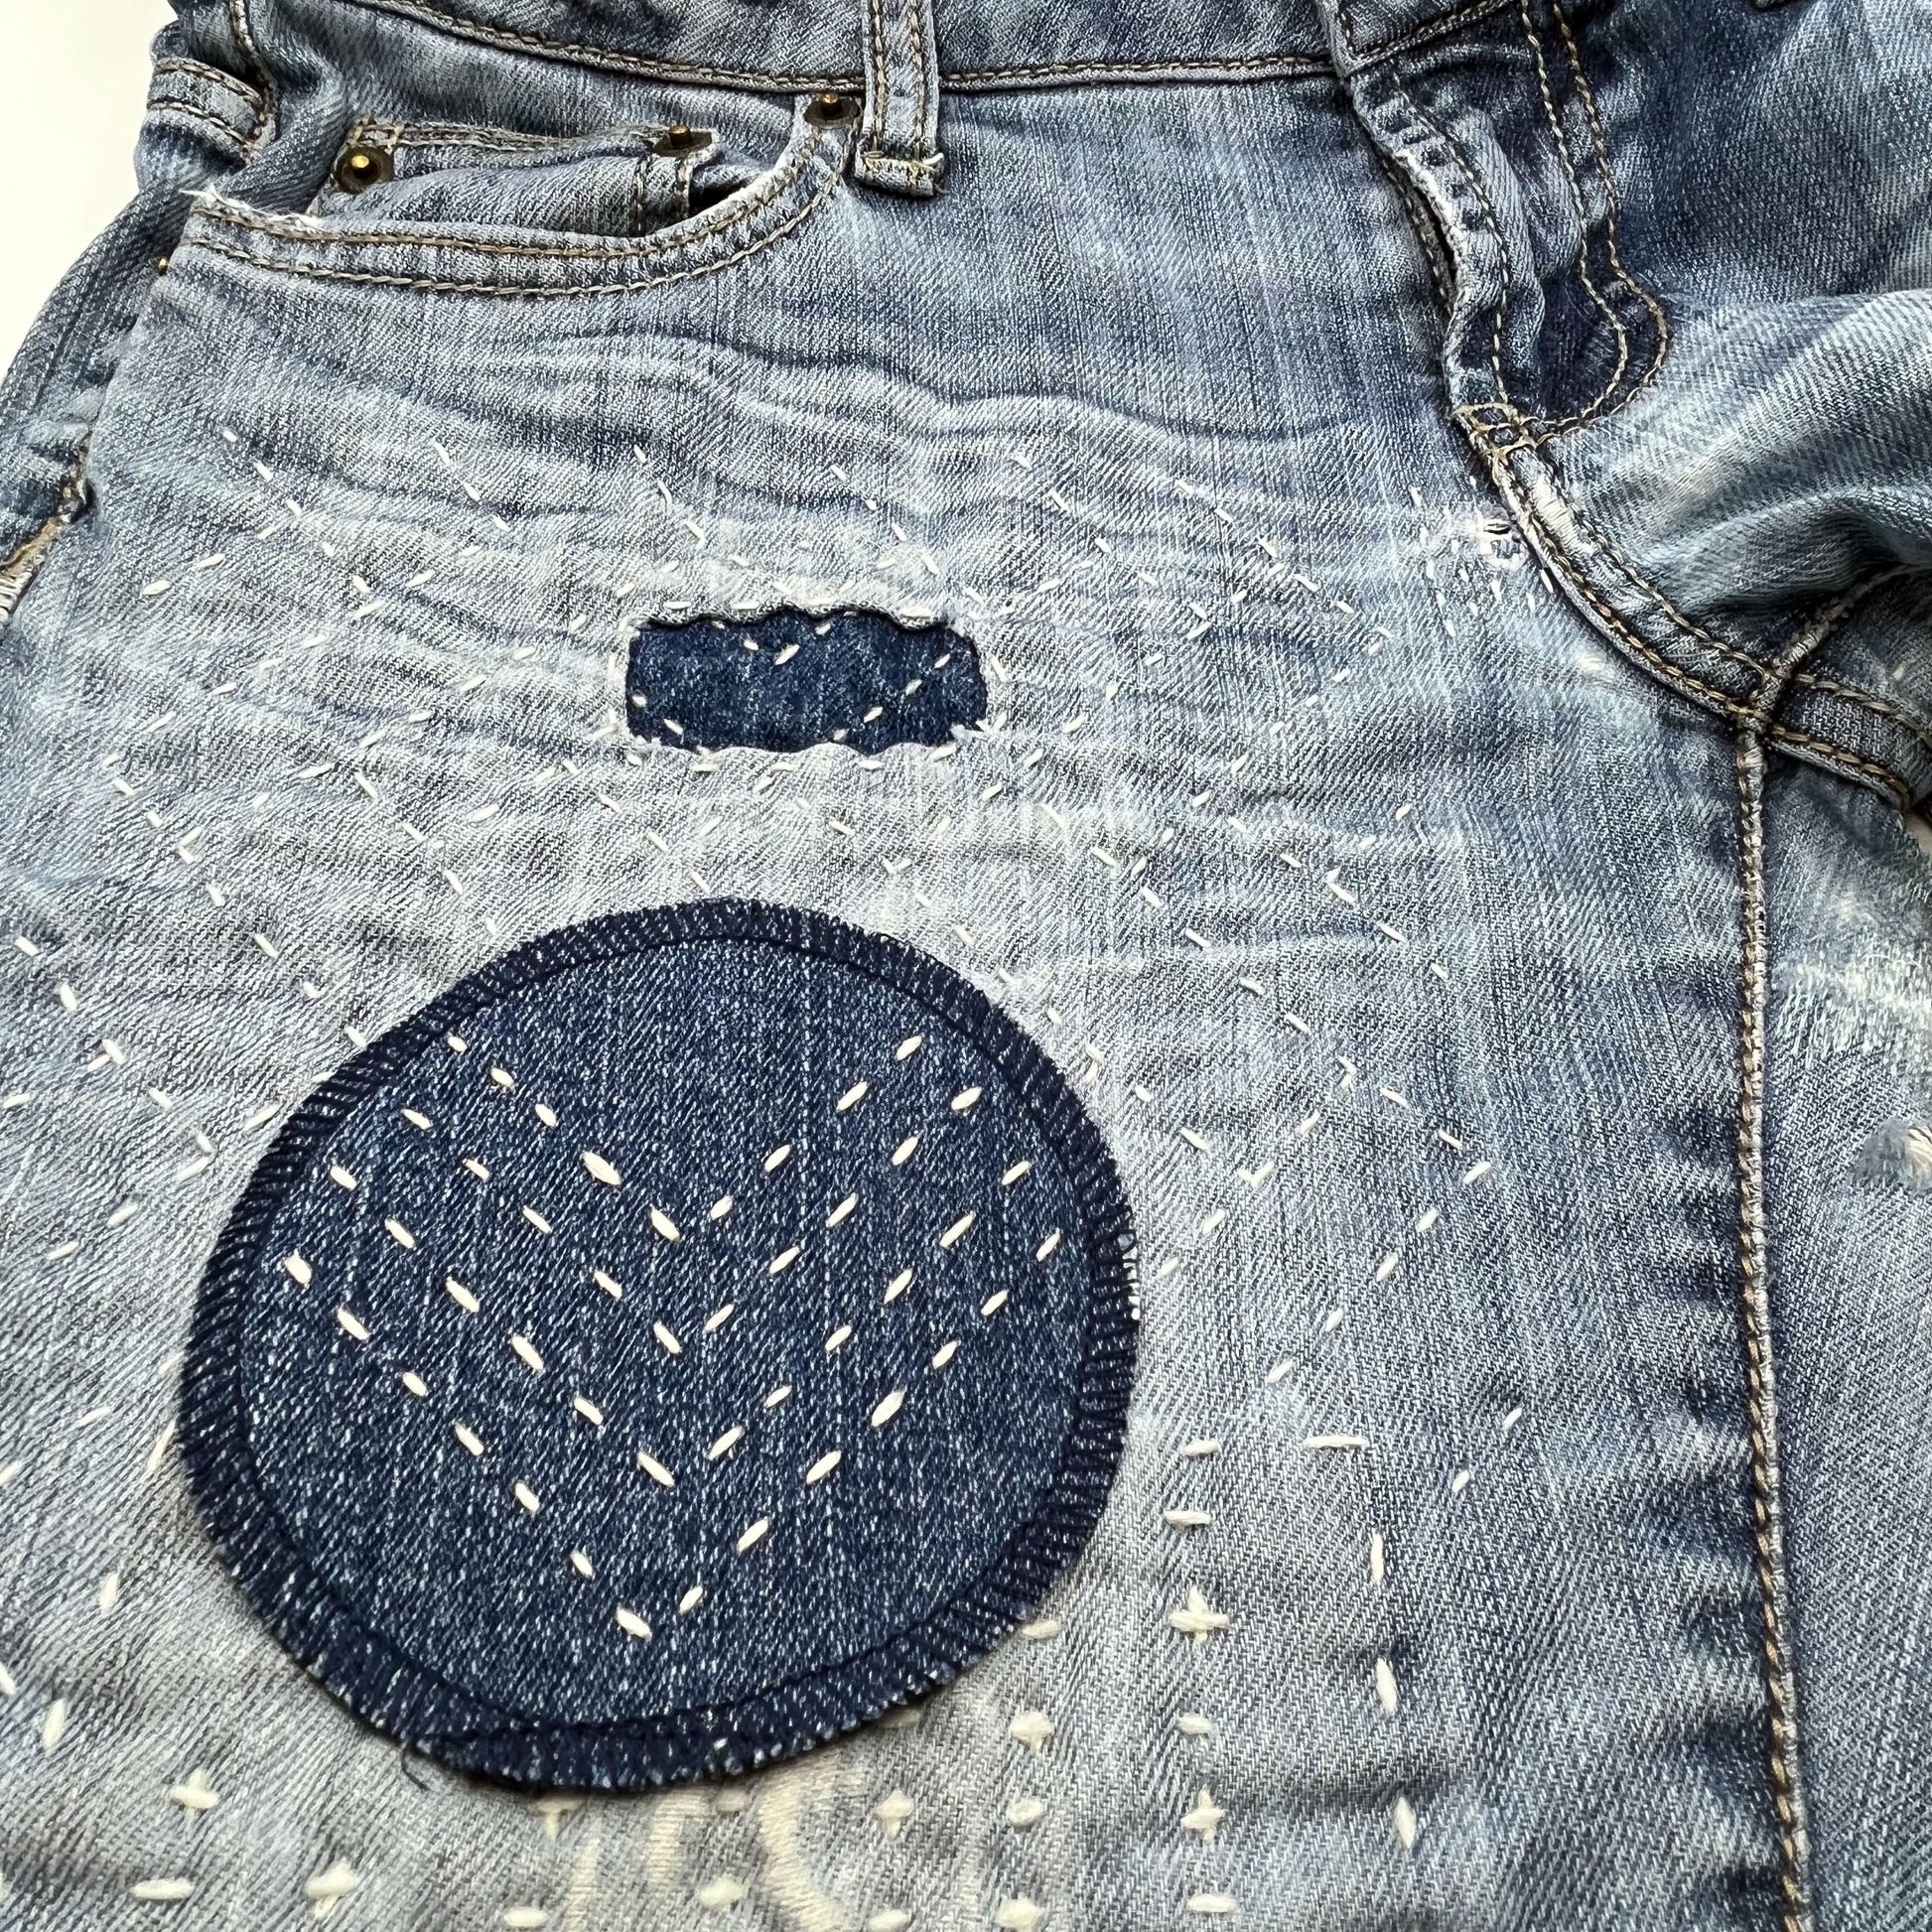 close up angled view of a circle shaped patch made out of denim, with overlocked edges, with rows of running stitches in a chevron pattern, on a pair of jeans with other visible mending and sashiko stitching